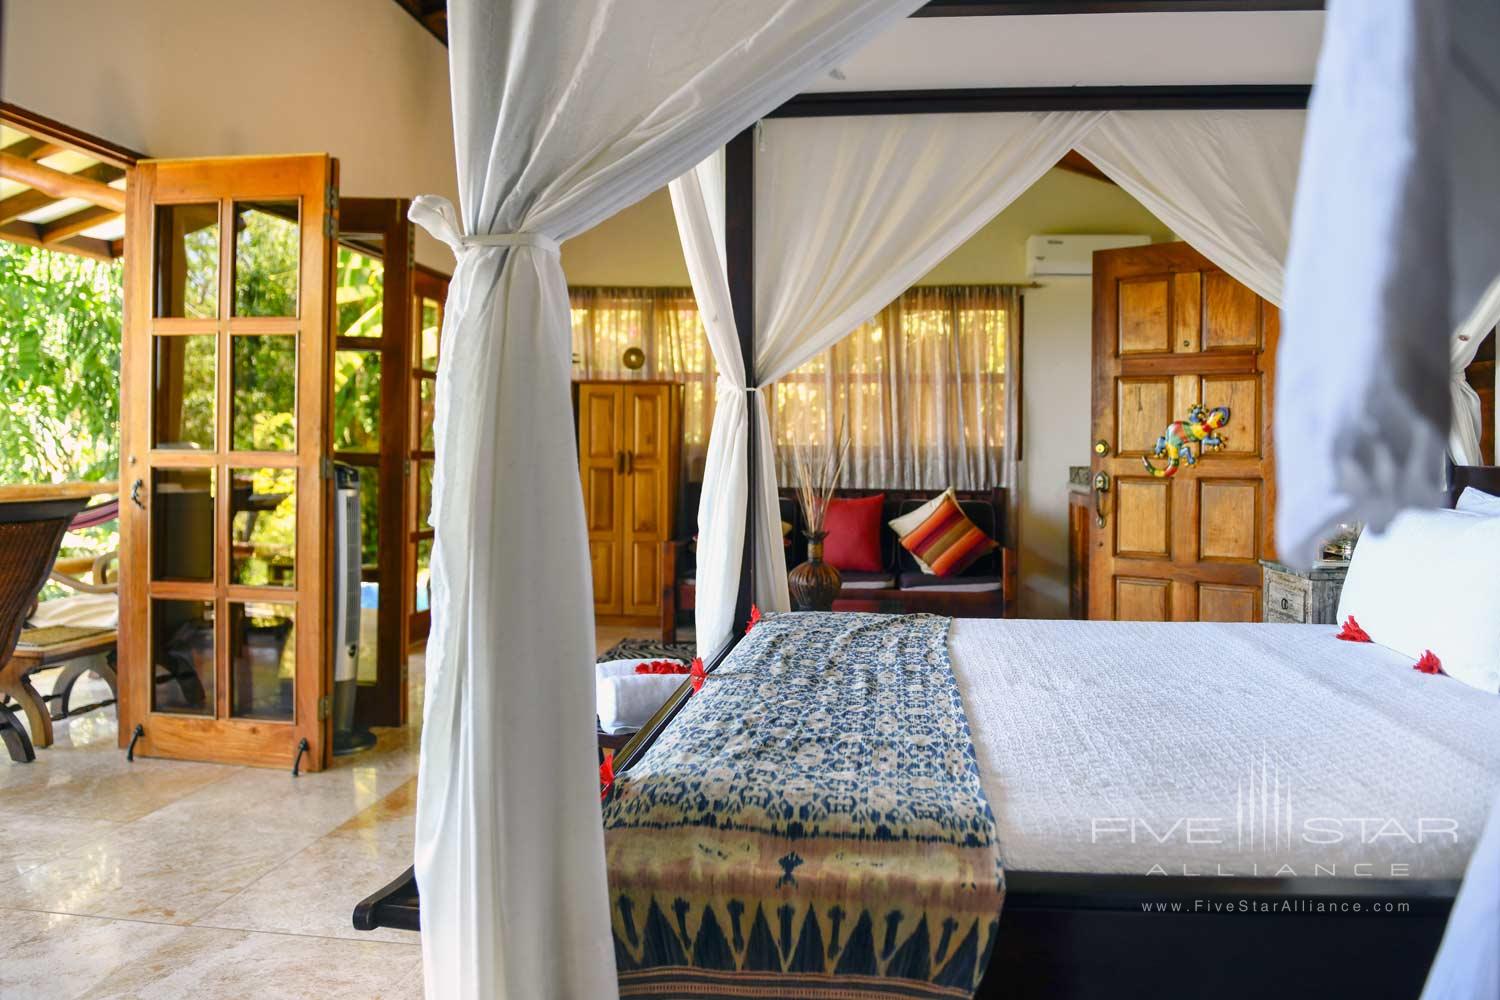 Guest Room at Casa Chameleon at Mal Pais, Costa Rica